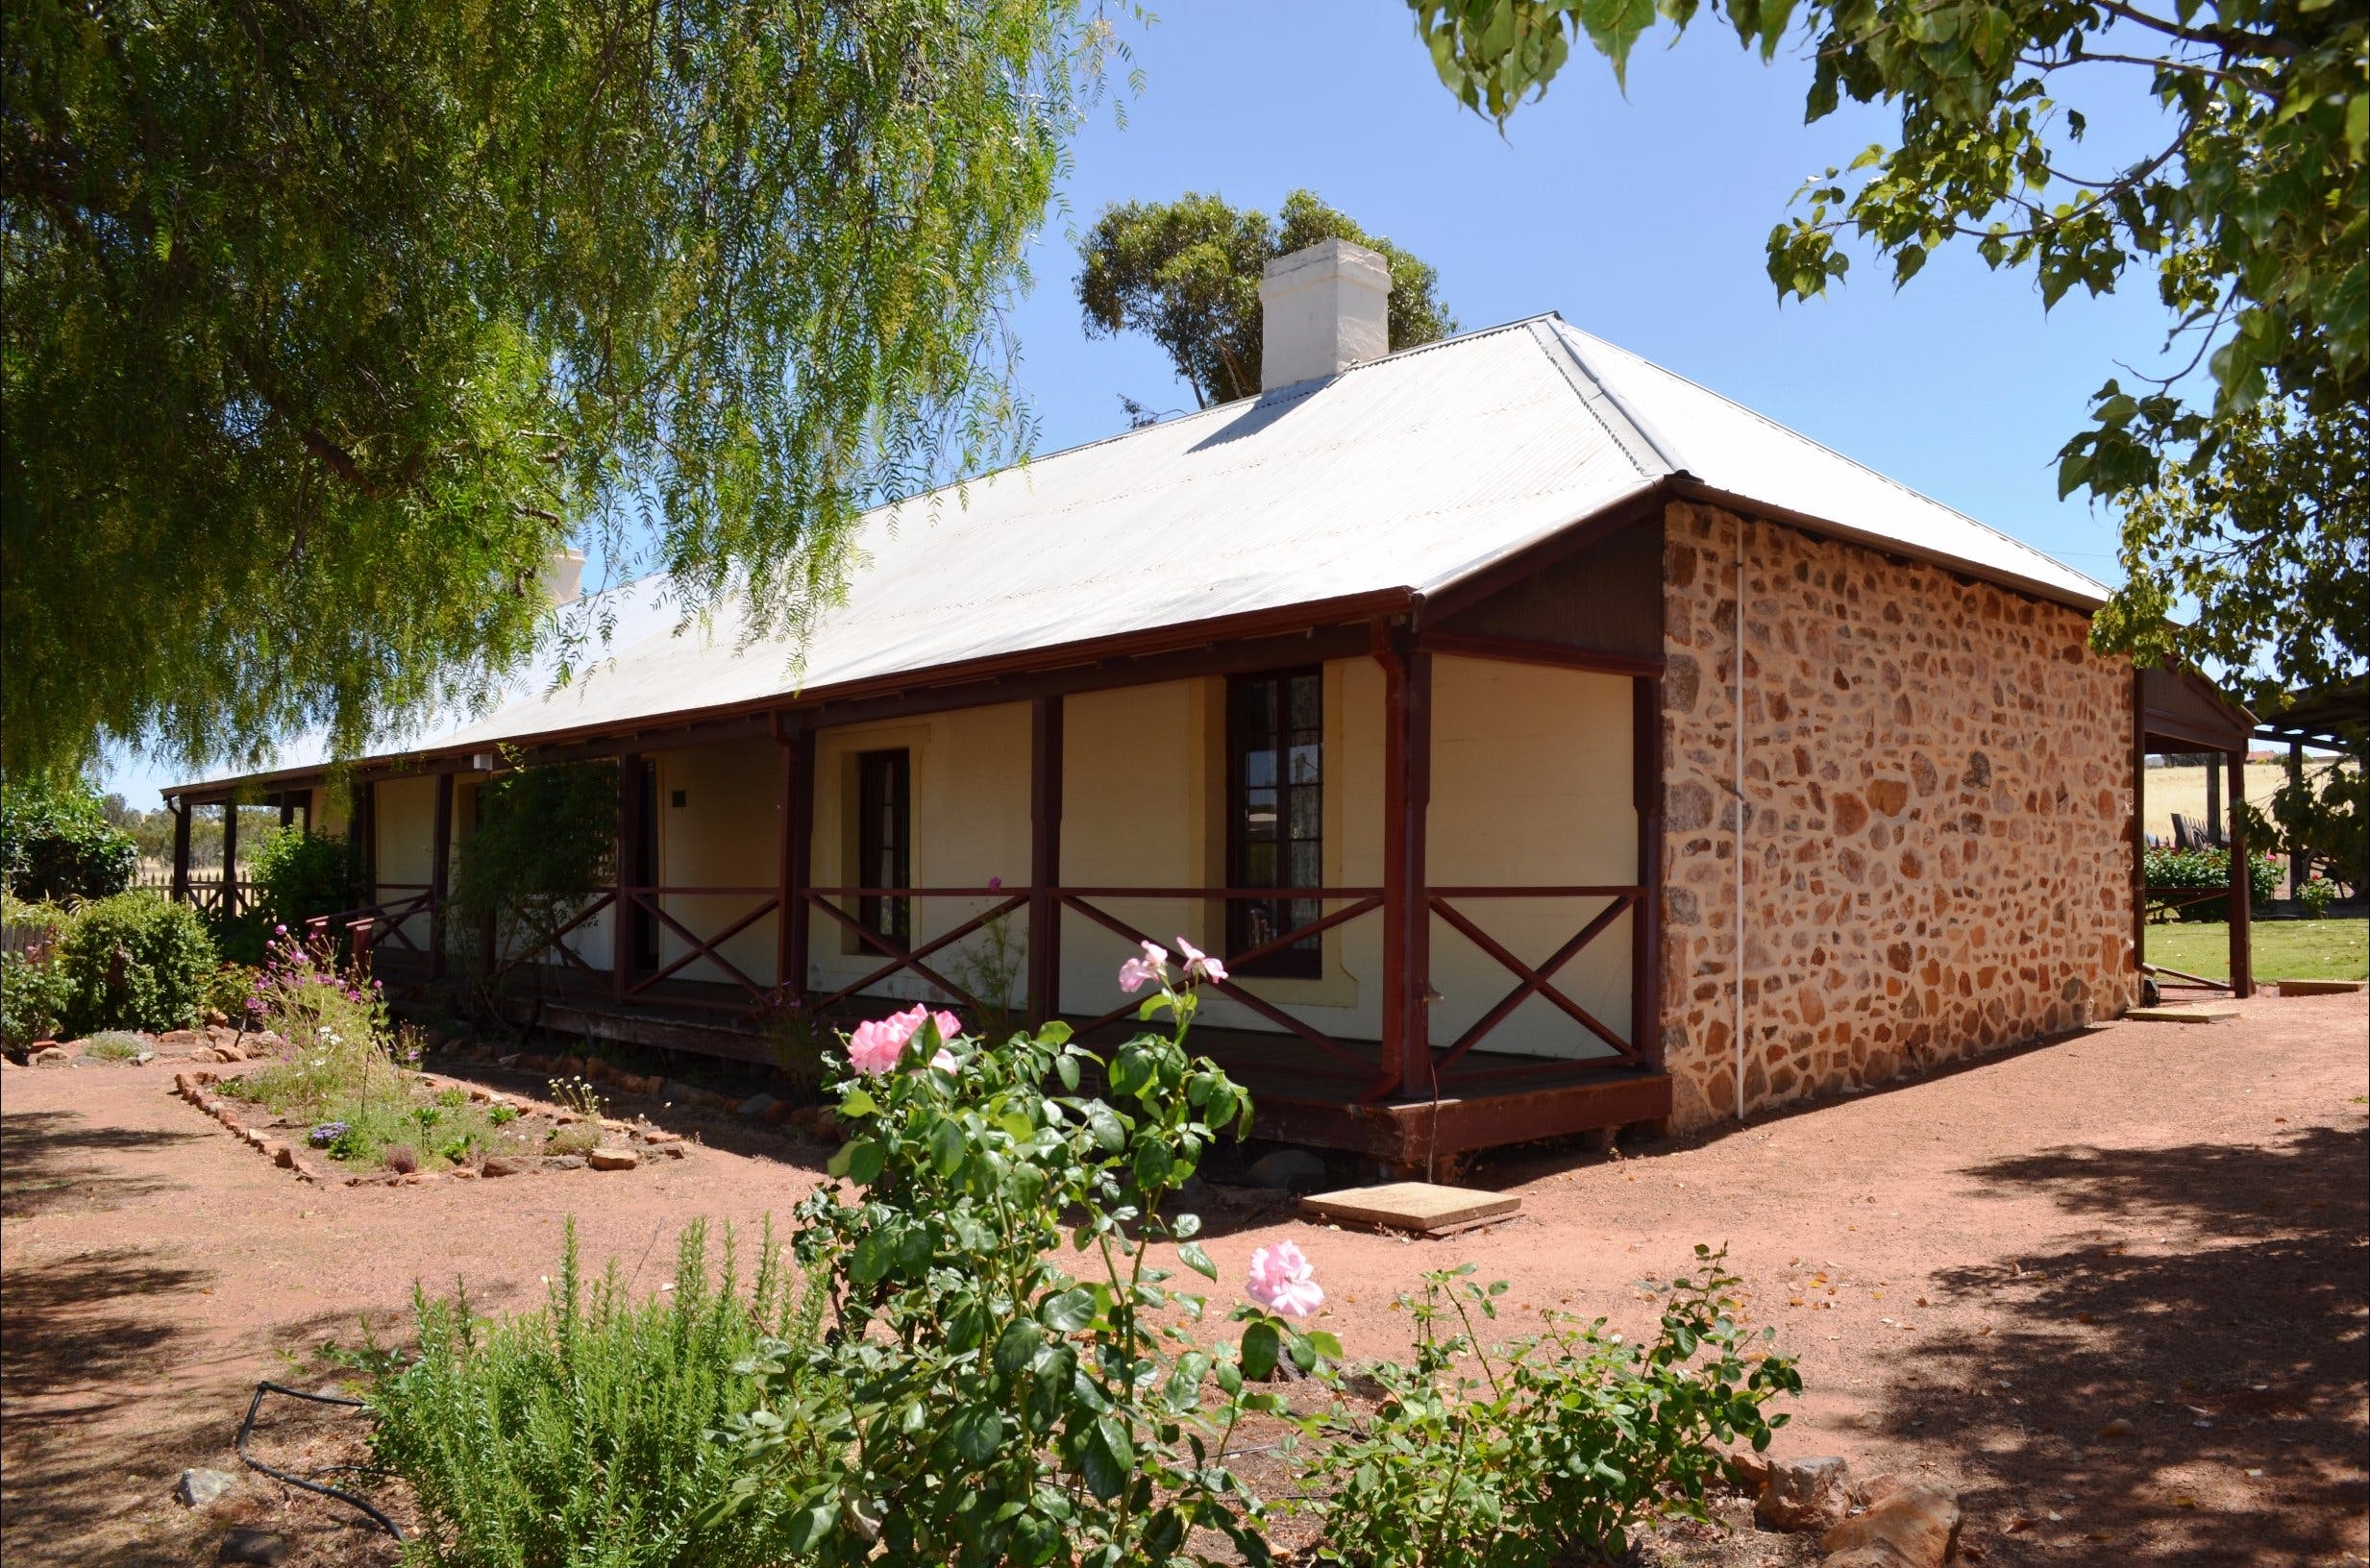 Morby Cottage - Wagga Wagga Accommodation